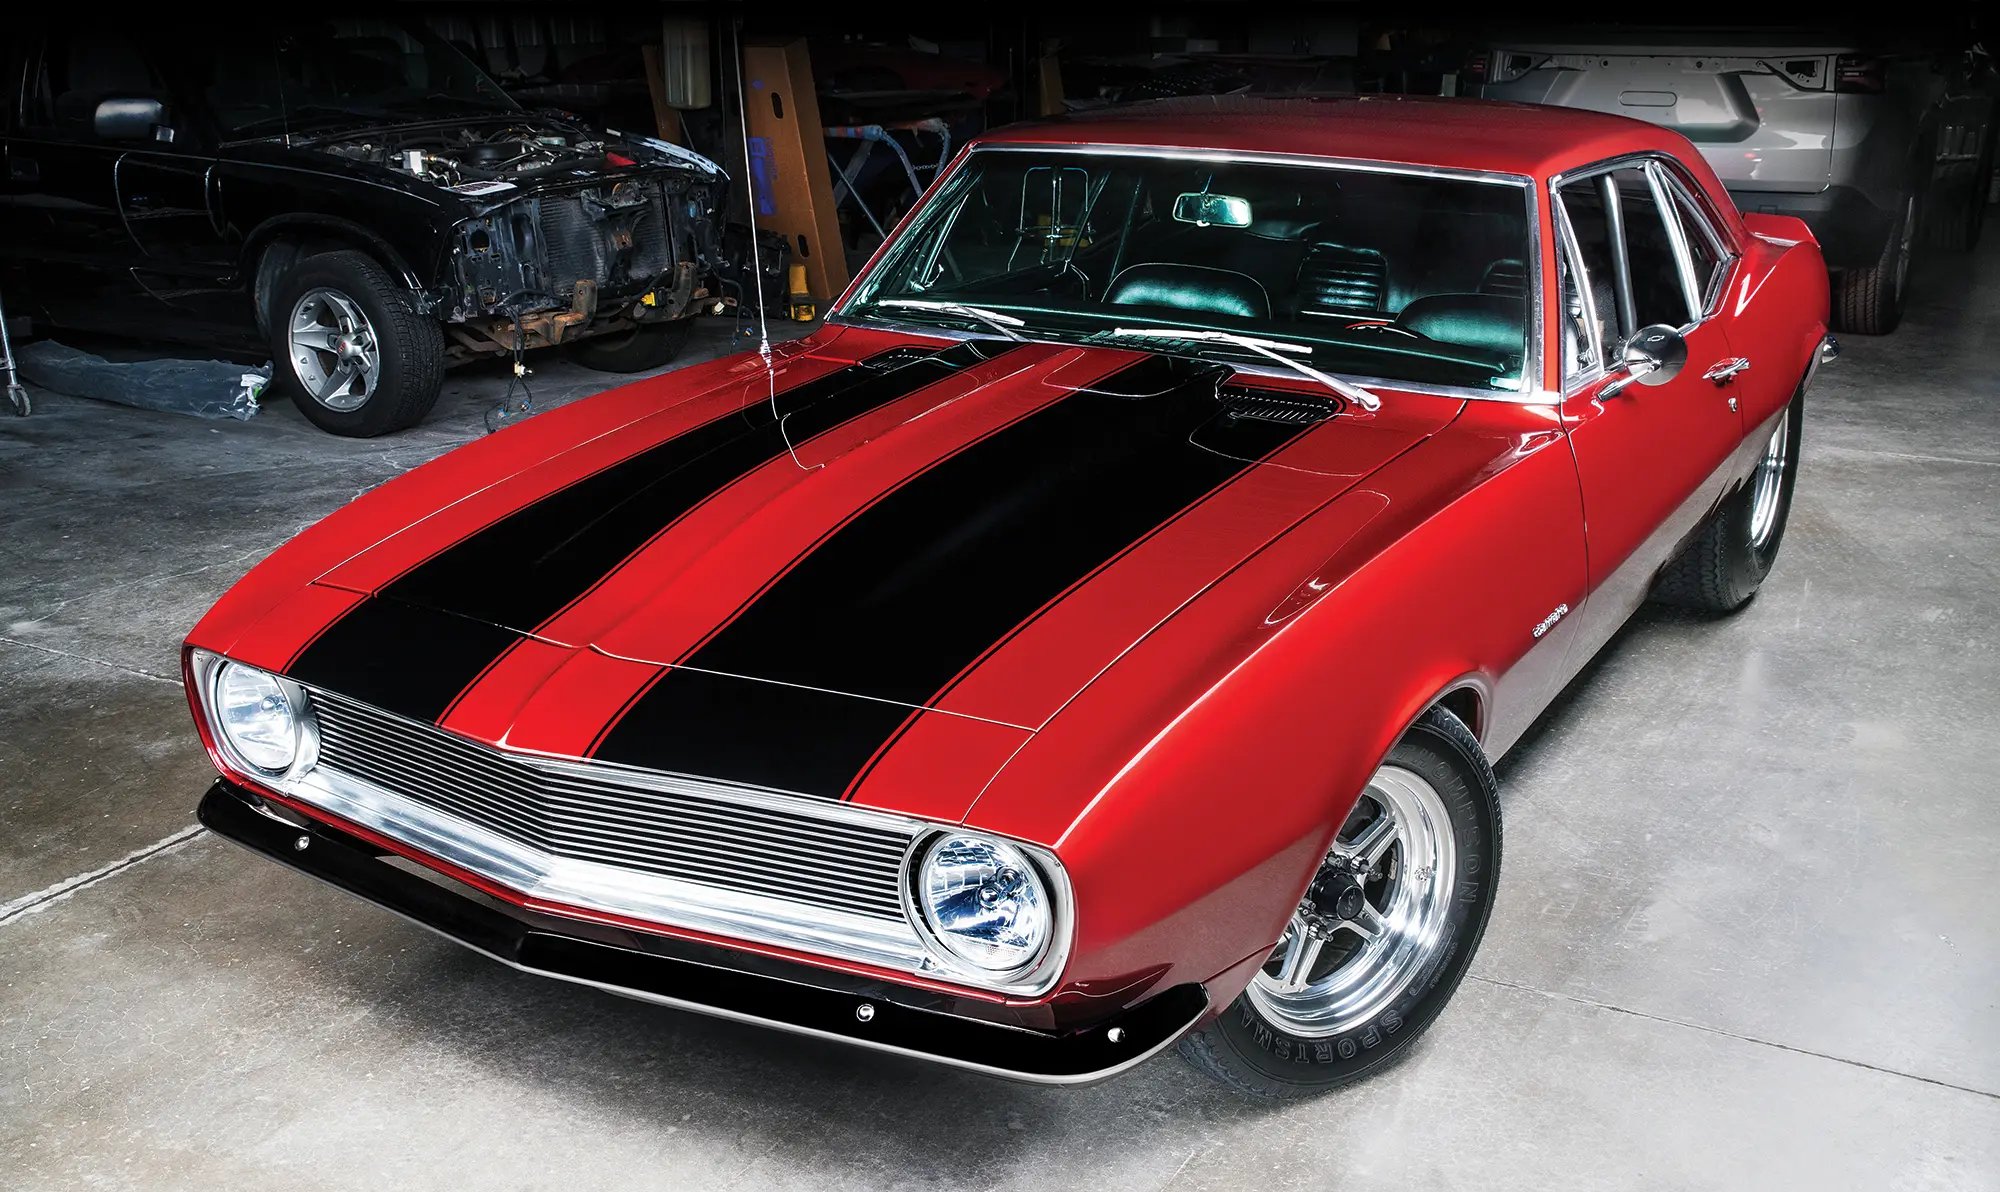 Metallic candy red '67 pro-street Camaro SS with black rally stripes